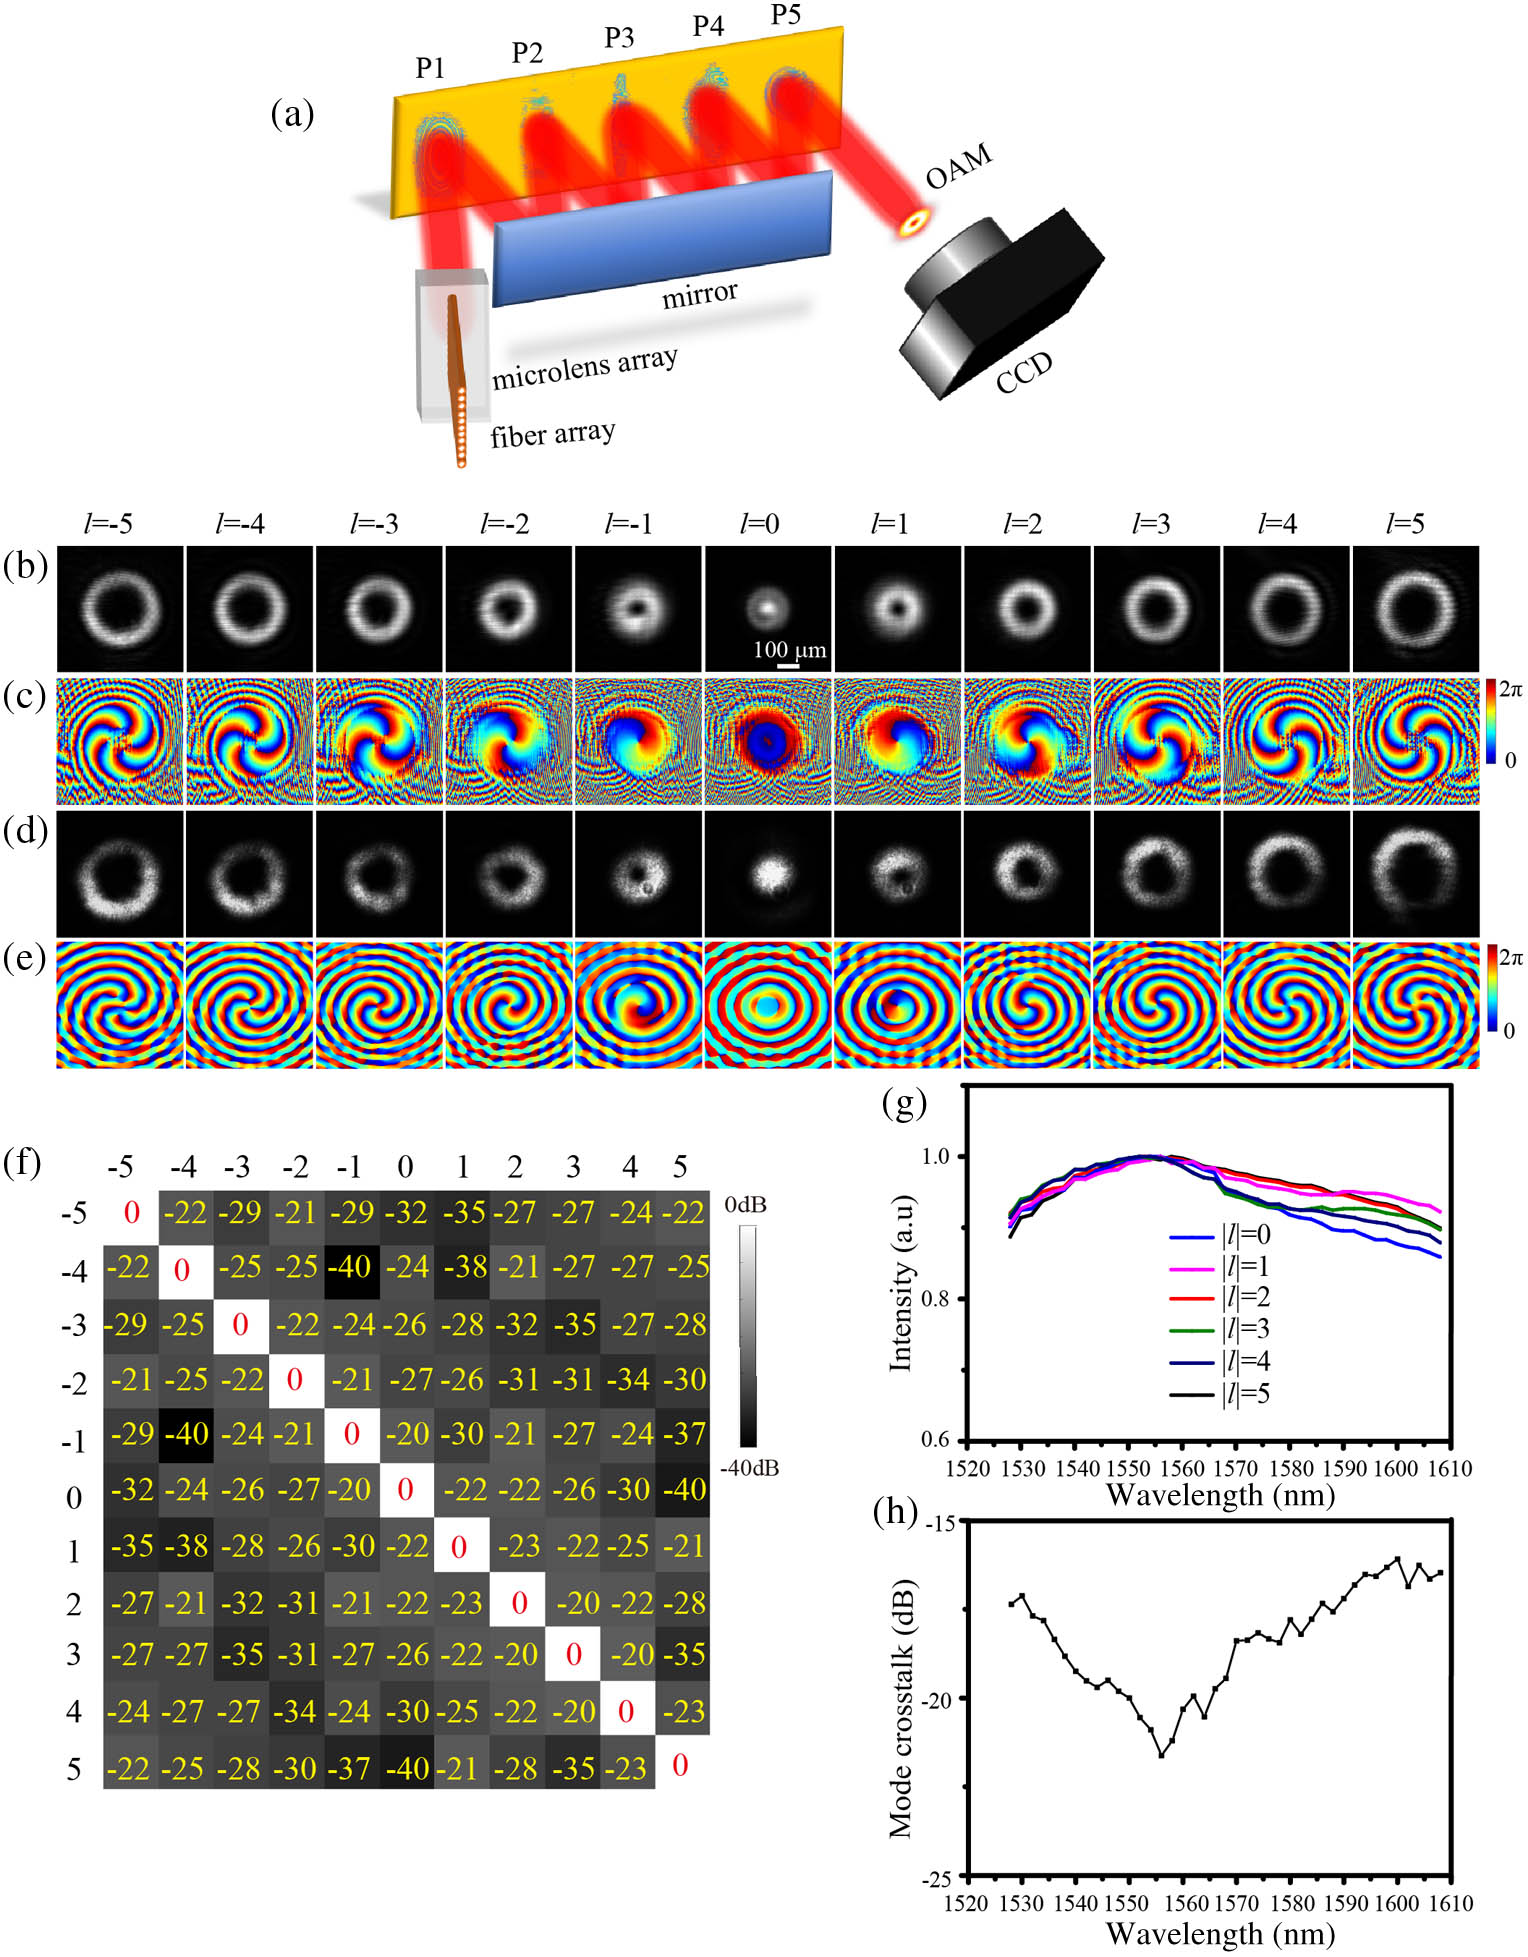 (a) Reflective OAM multiplexer based on MPLC. Calculated images of (b) the OAM intensity profile and (c) the phase of the OAM. (d) Intensity profiles of the OAM generated by MPLC in the experiments. (e) Reconstructed phase profiles for the OAM generated from off-axis holography. (f) Measured mode crosstalk matrix for the OAM. (g) Conversion efficiency and (h) maximum mode crosstalk of the OAM multiplexer over the C-band and the L-band wavelengths.